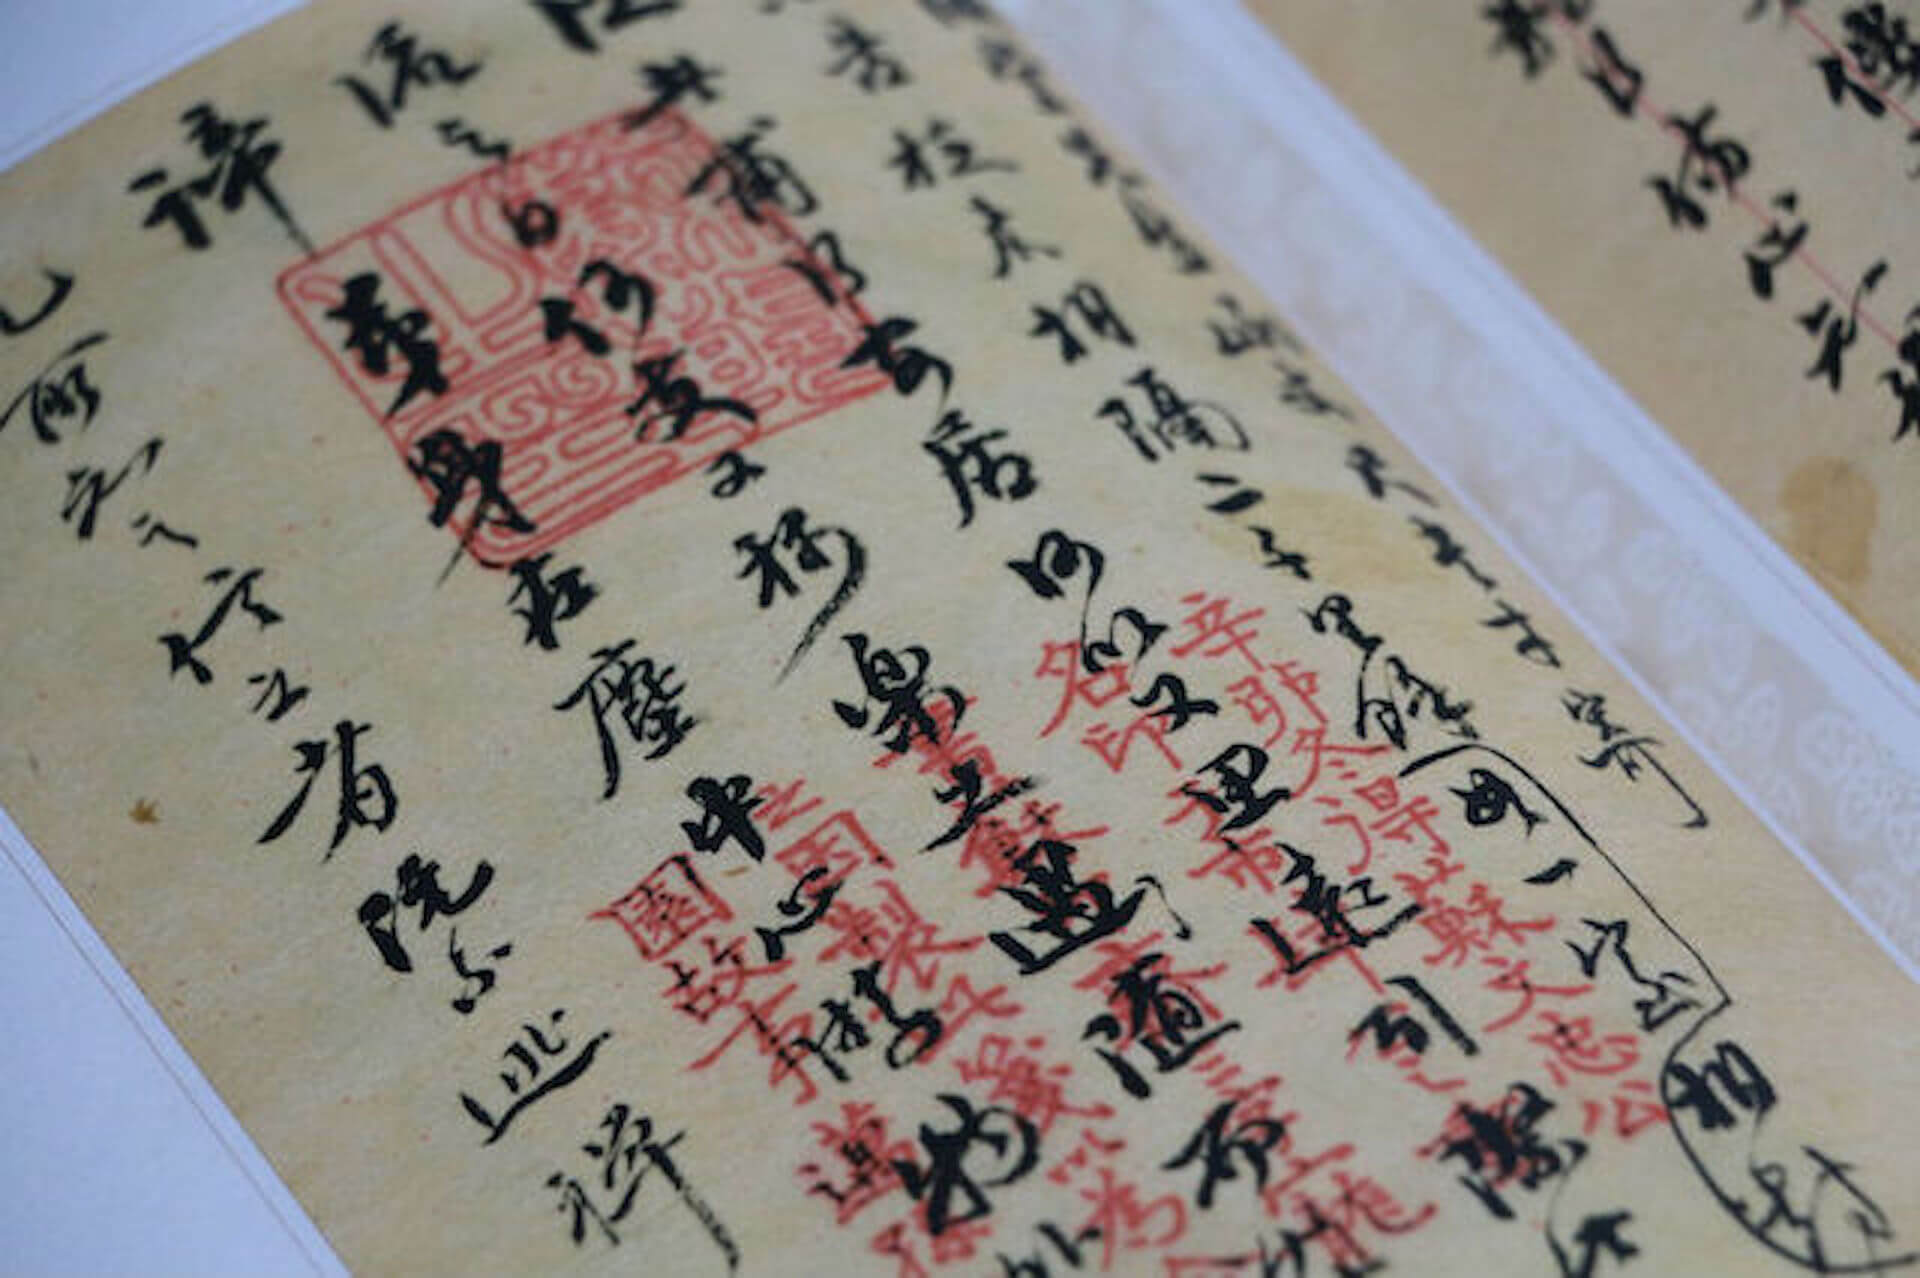 chinese characters written on paper